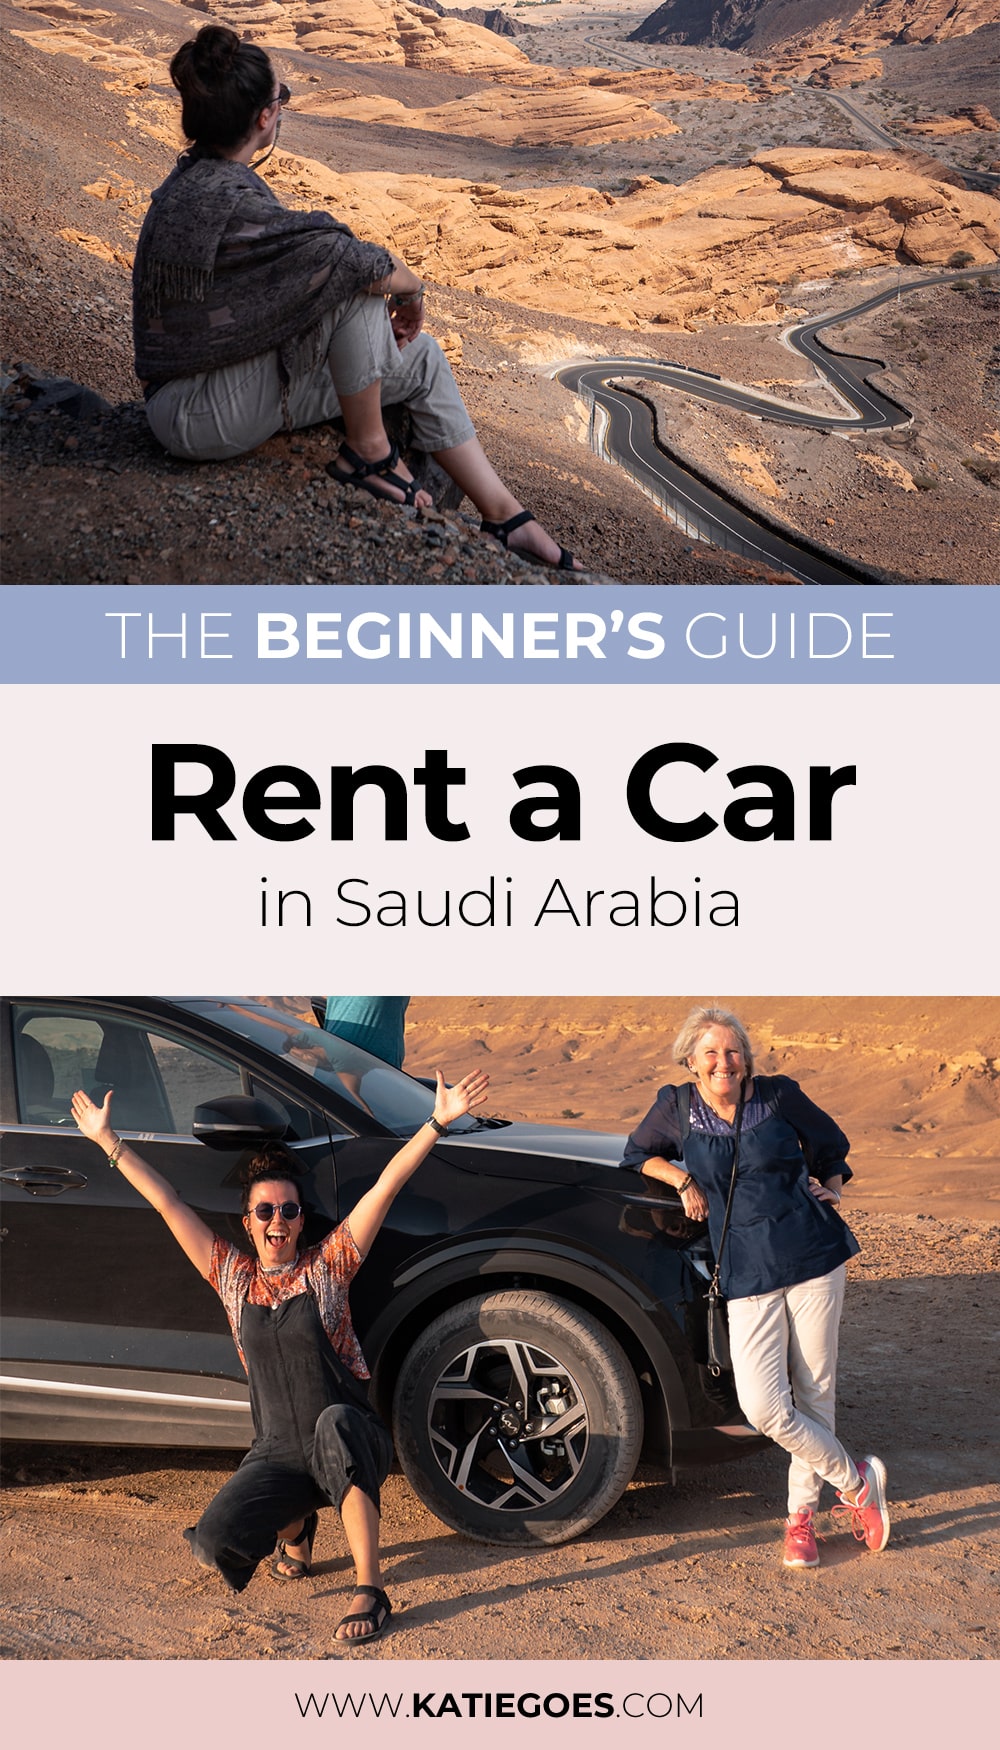 How to Rent a Car in Saudi Arabia (The Beginner's Guide) 10